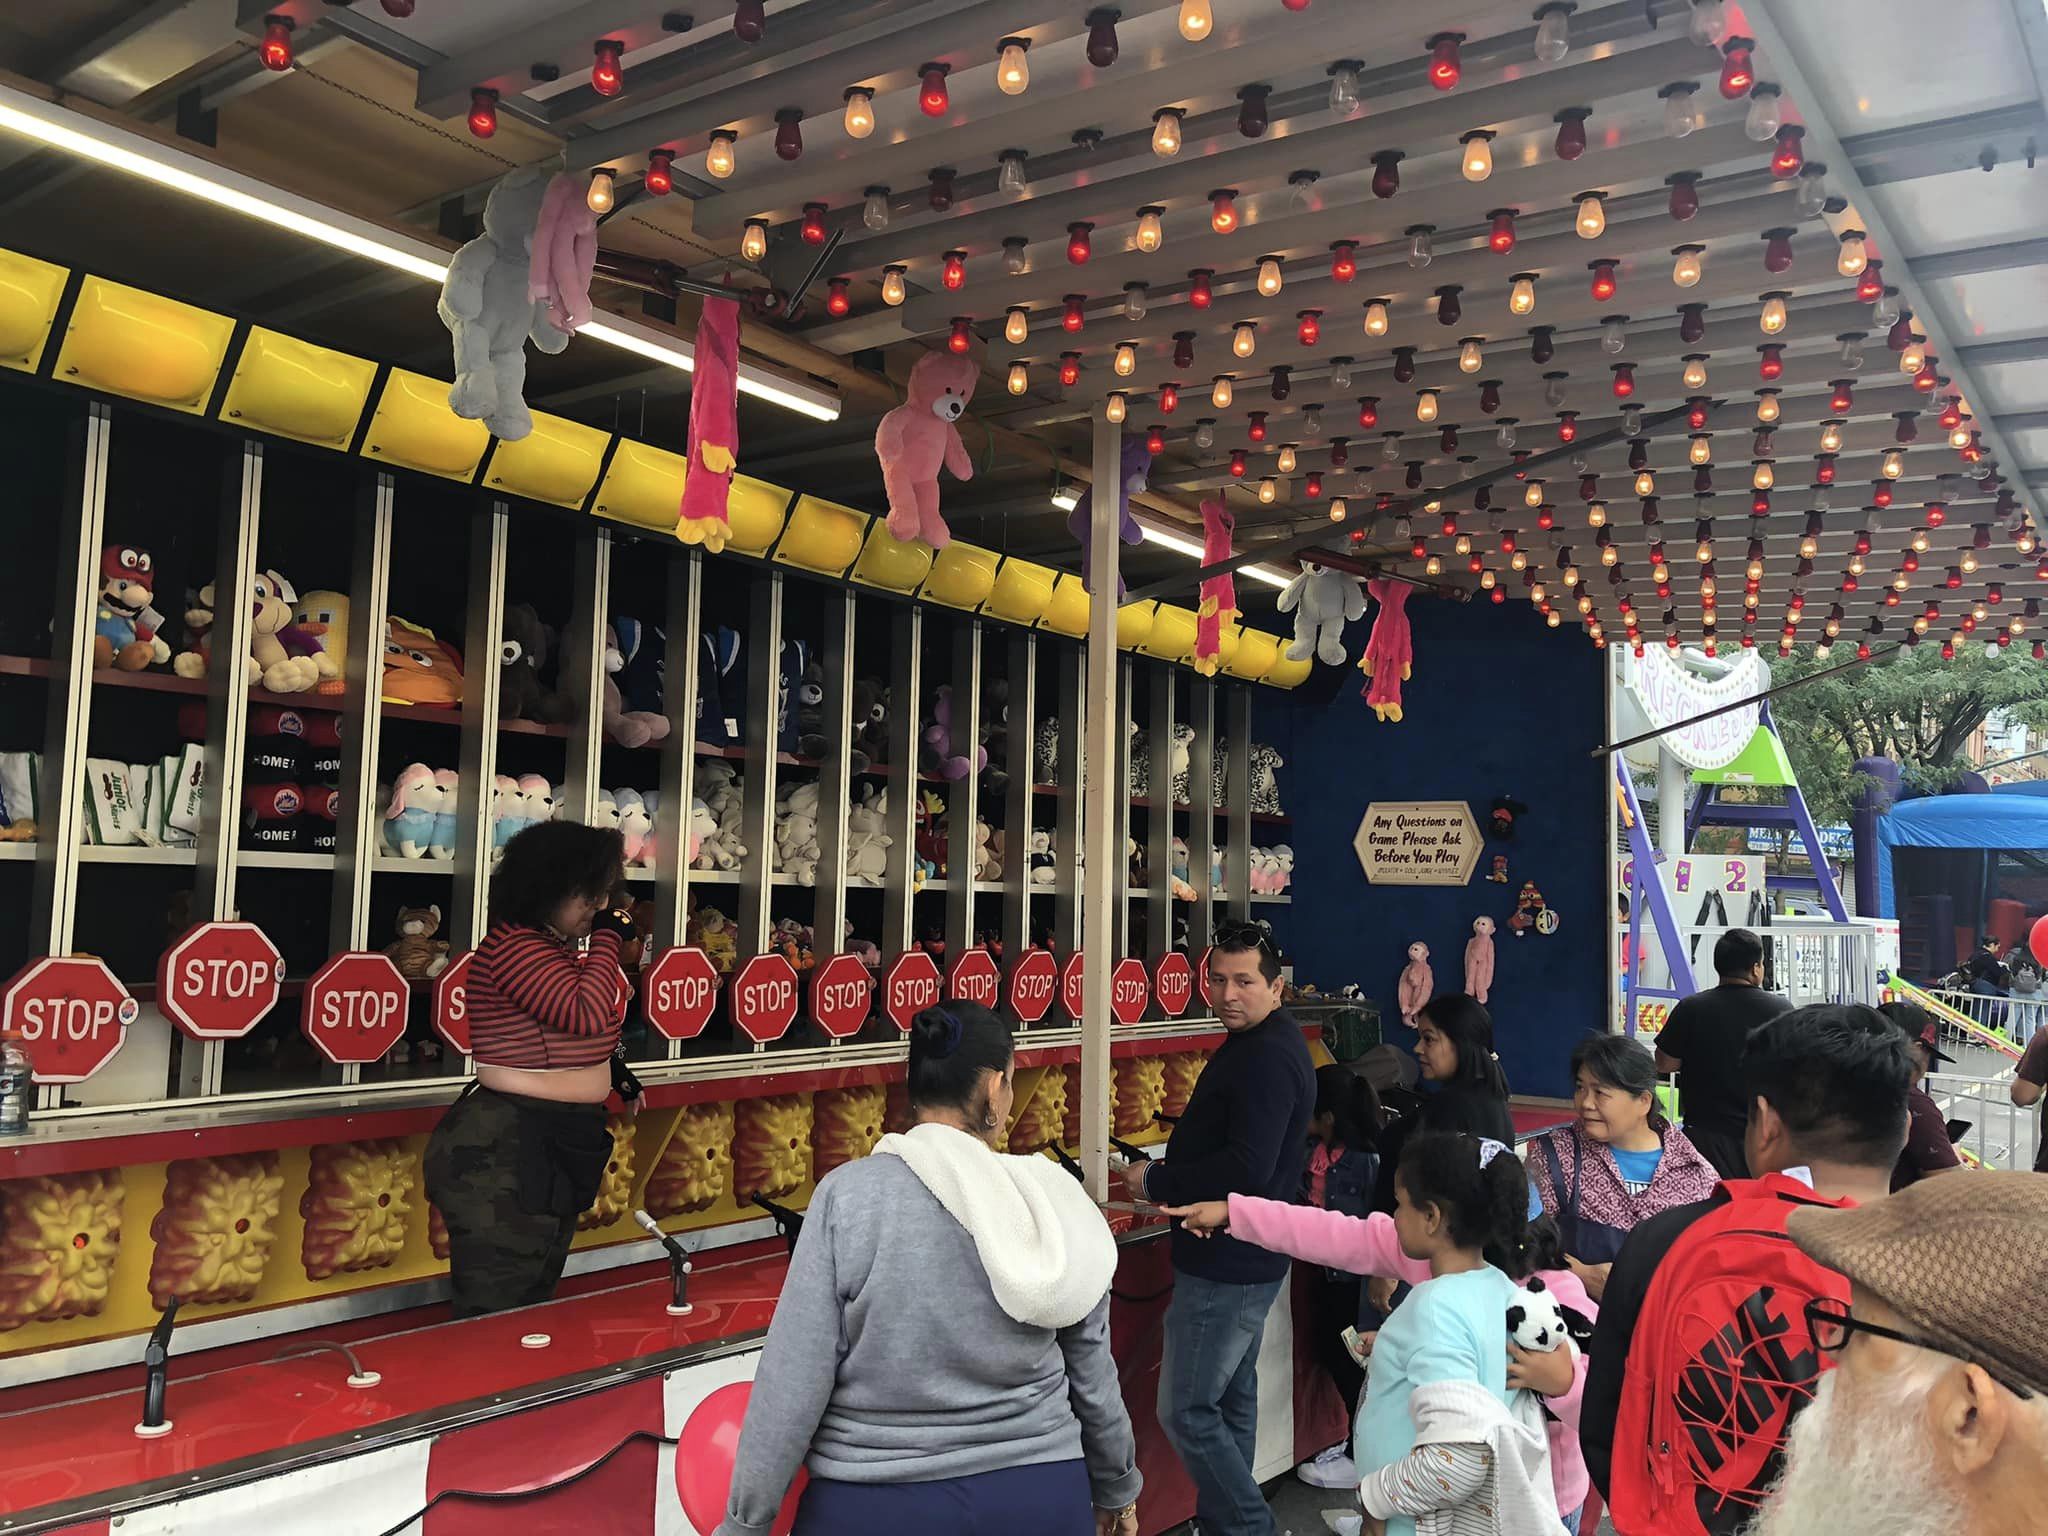 A bustling carnival game booth with people playing hit-a-mole, decorated with lights and plush prizes on display. a child points excitedly, and adults accompany their kids around the booth.